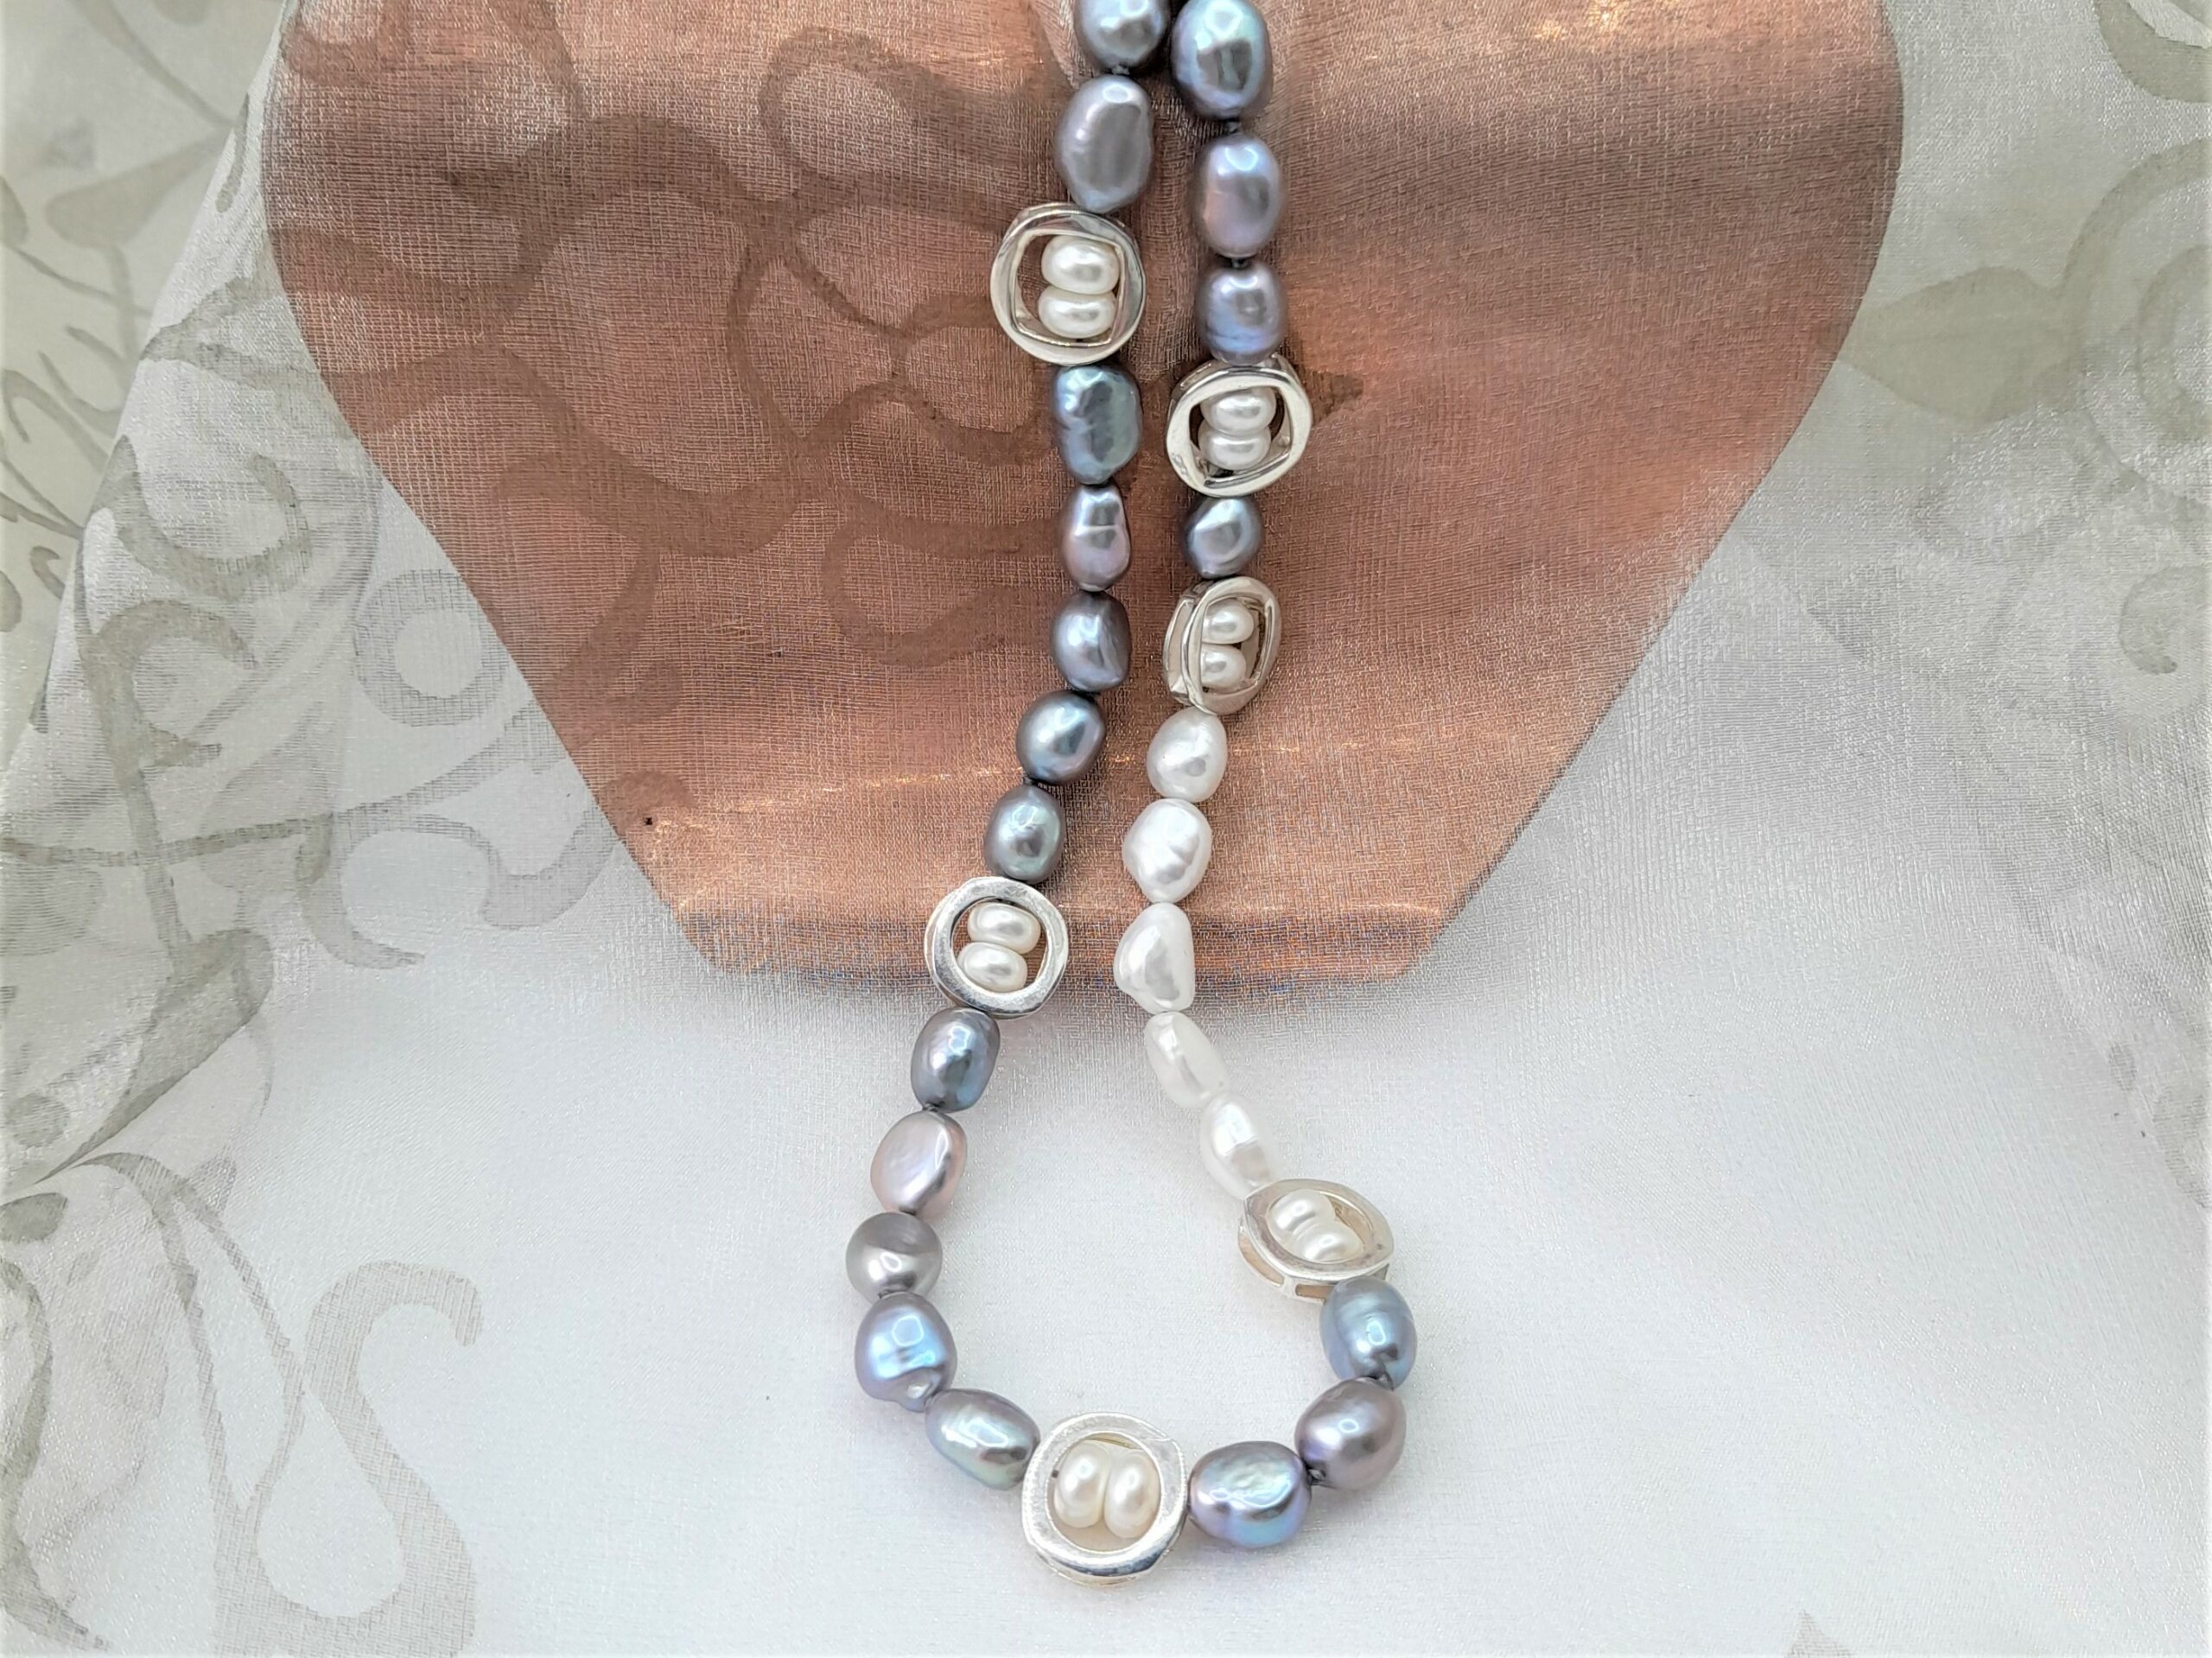 Striking contemporary Freshwater Pearl Necklace designed with a pattern of grey & white freshwater pearls & Sterling Silver elements framing button shape pearls,  in an asymmetrical pattern.   